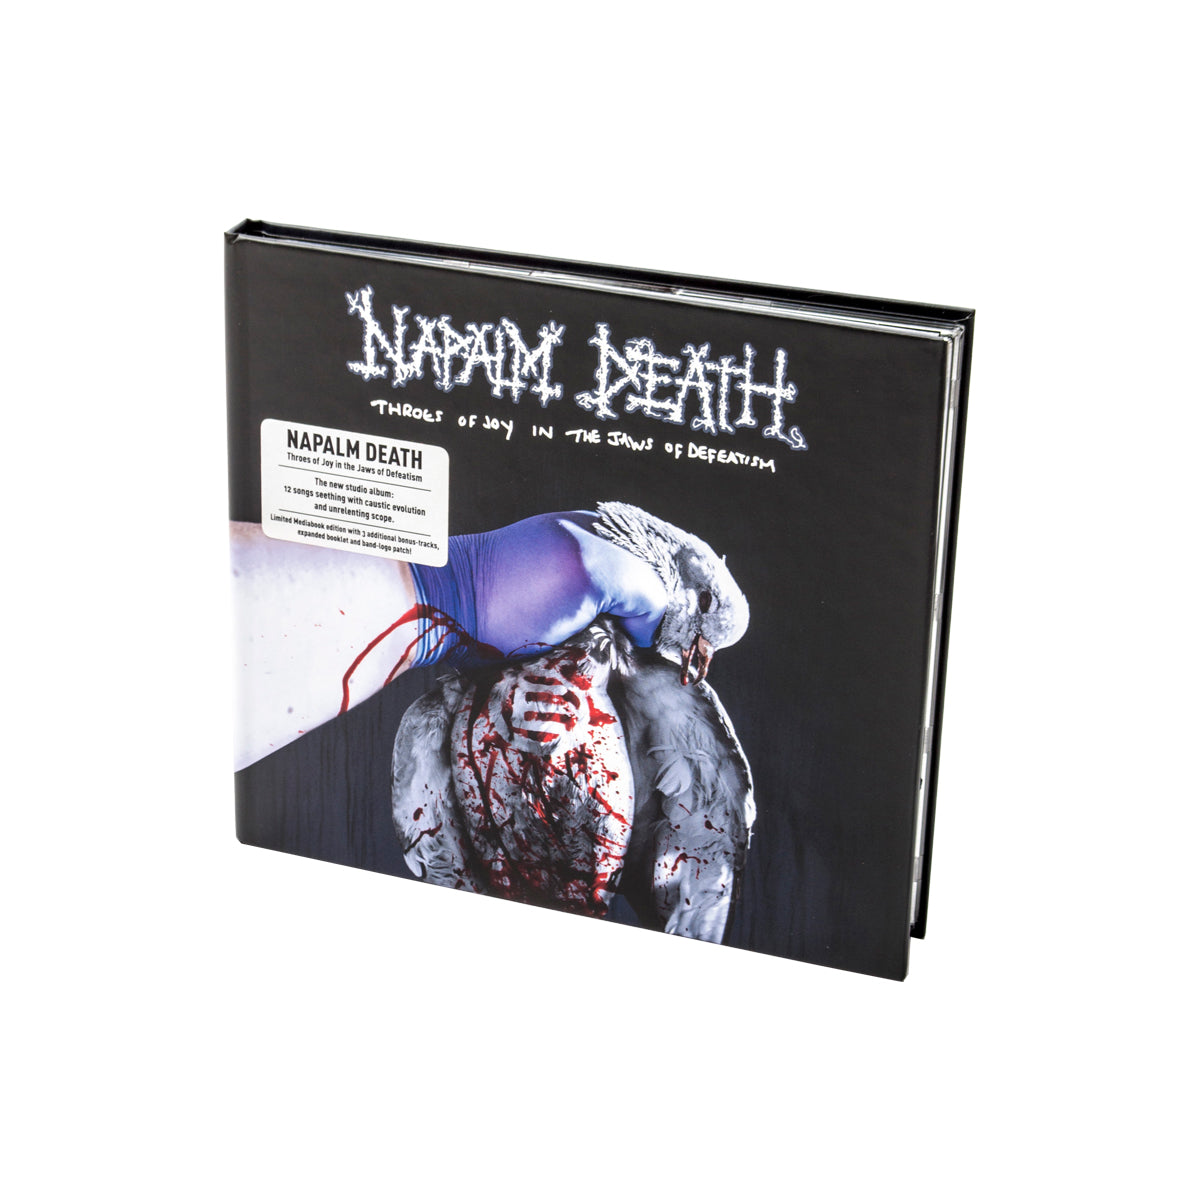 NAPALM DEATH - Throes Of Joy In The Jaws Of Defeatism - CD Mediabook + Patch